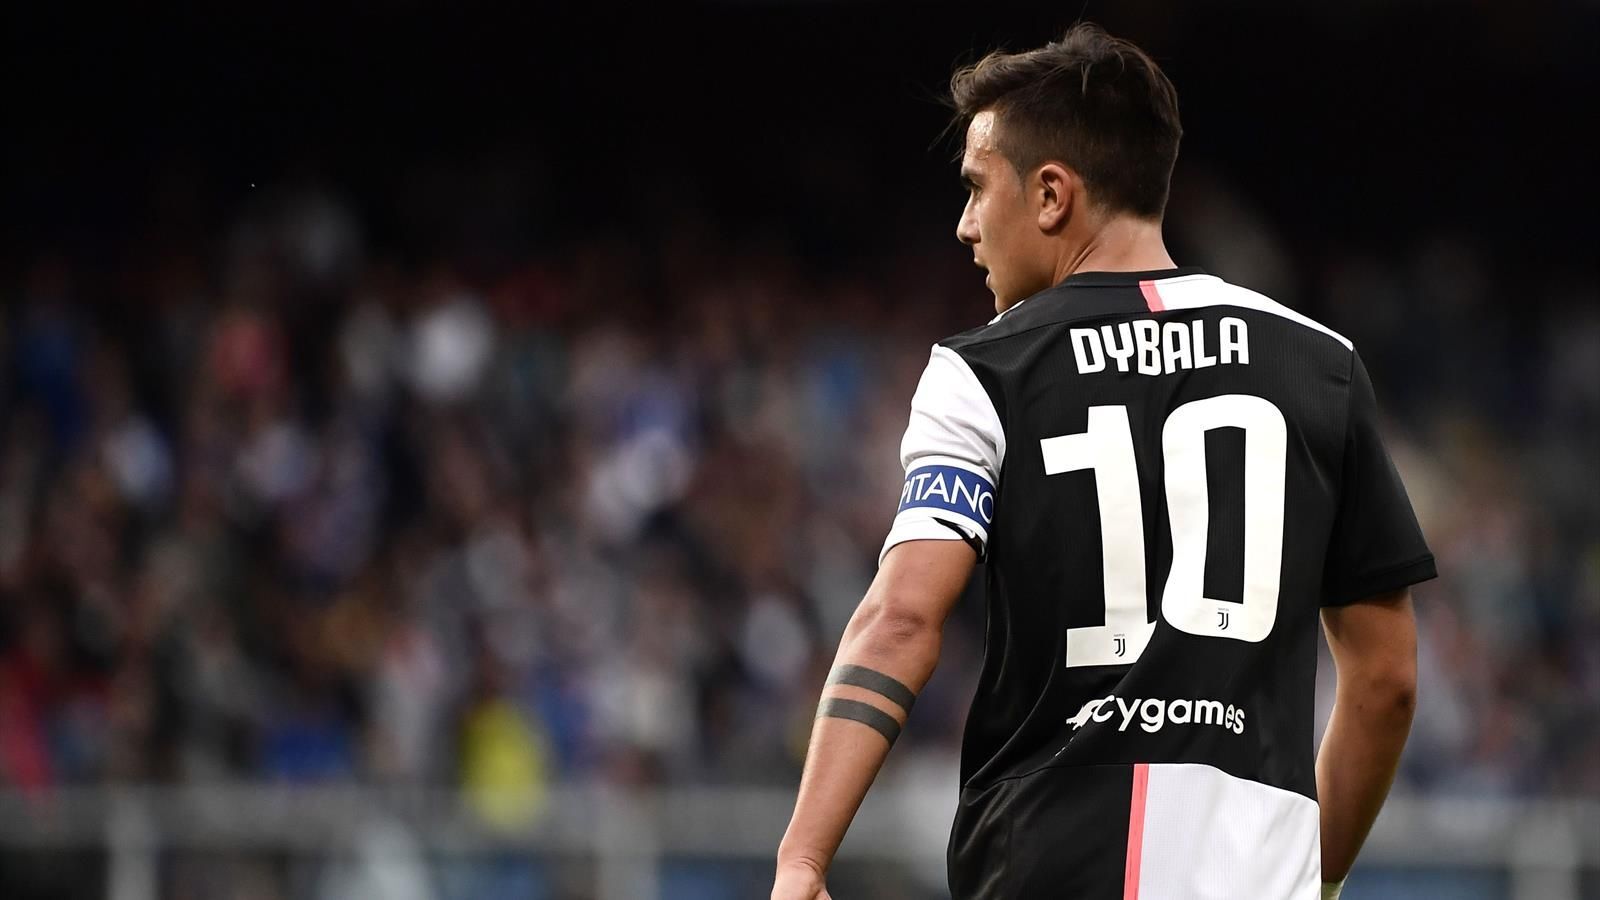 Juventus are confident of renewing Paulo Dybala’s contract